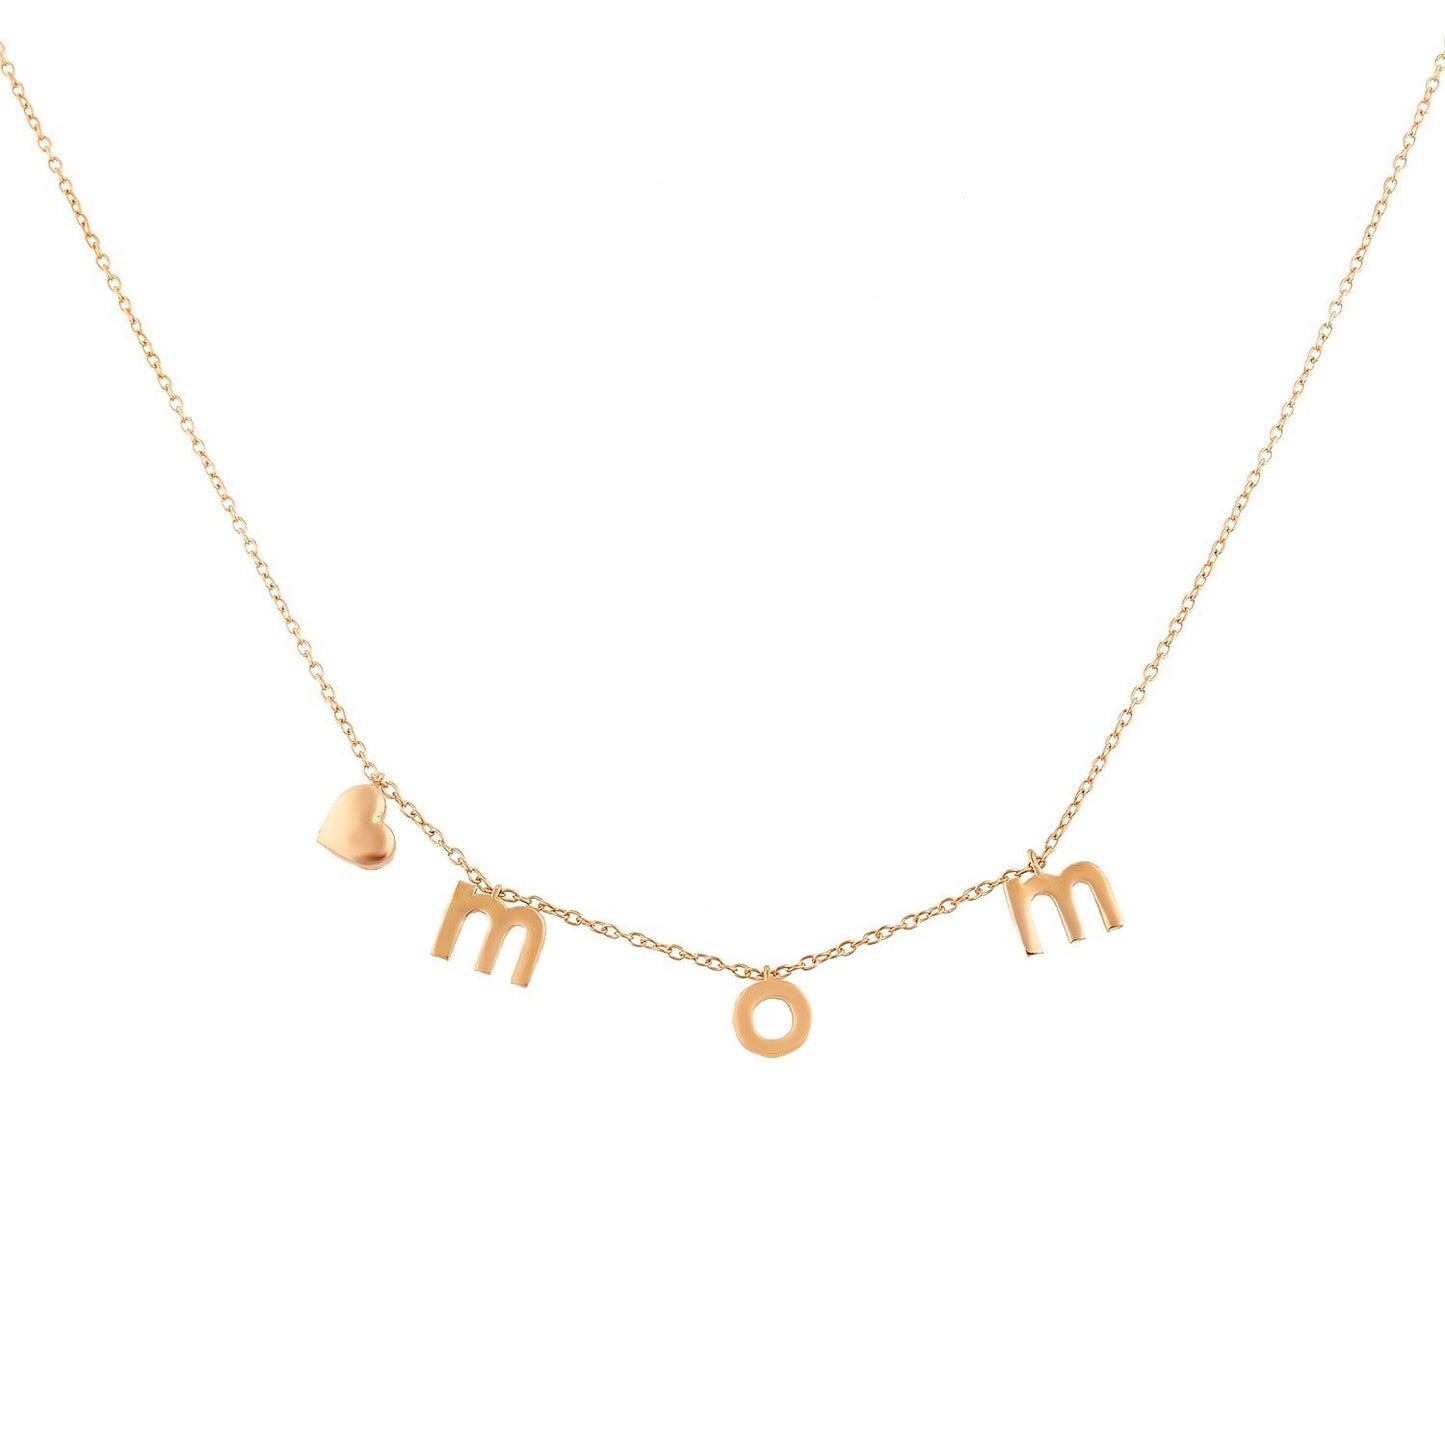 It’s All in a Name™ Lower Case Personalized Necklace JEWELRY The Sis Kiss Rose Gold NO Crystals